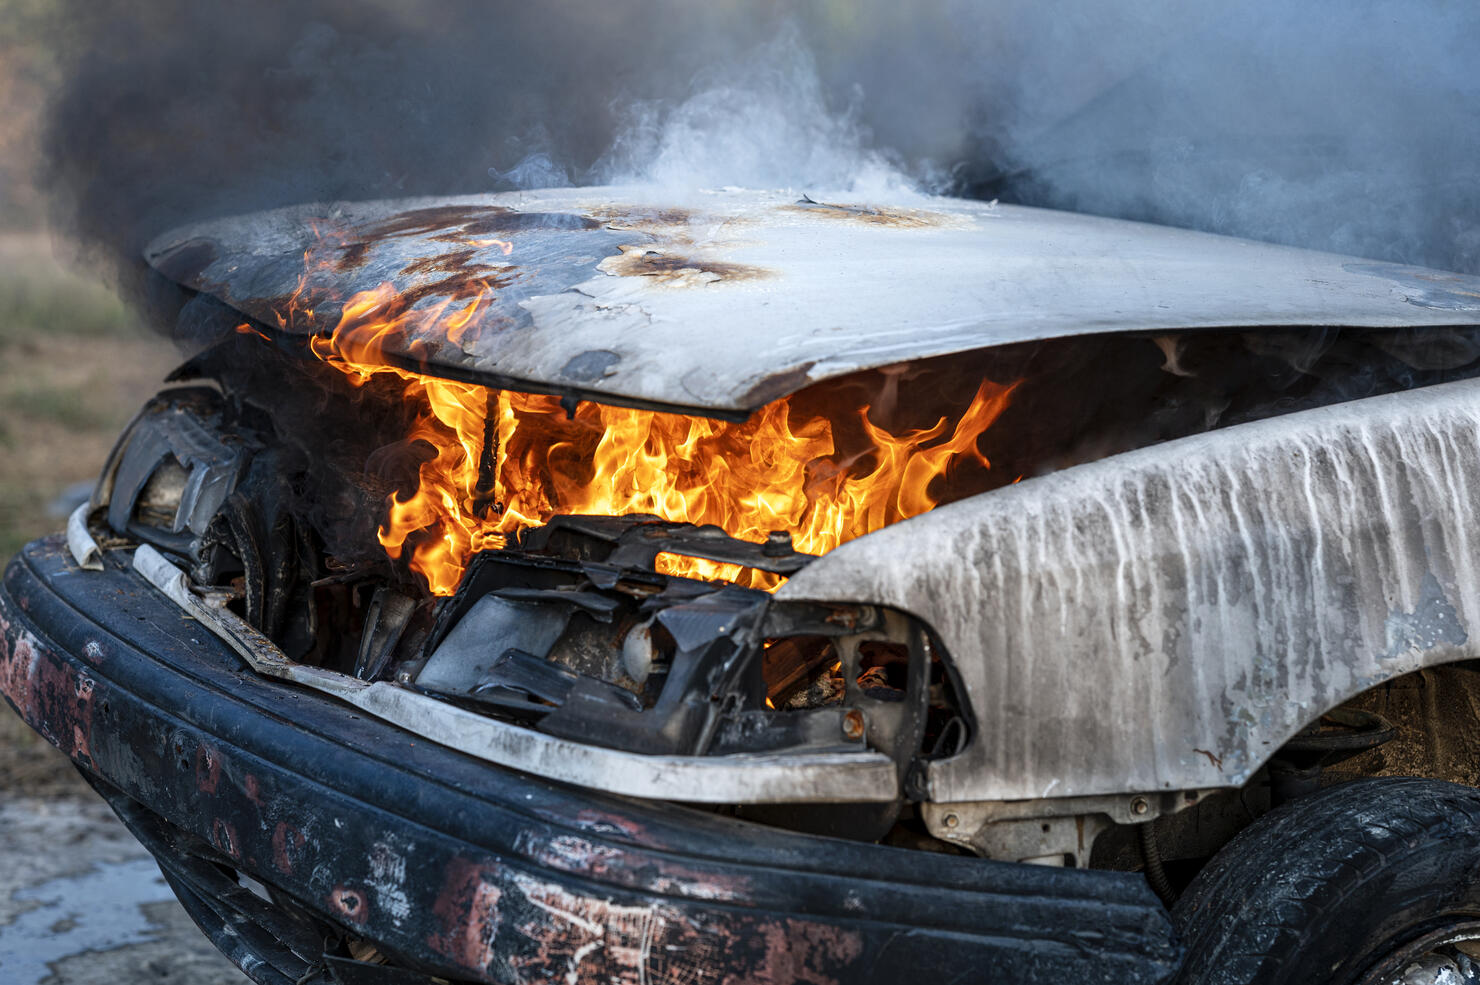 Close-up of burning car engine after a frontal crash collision on the roadside with flame and smoke.